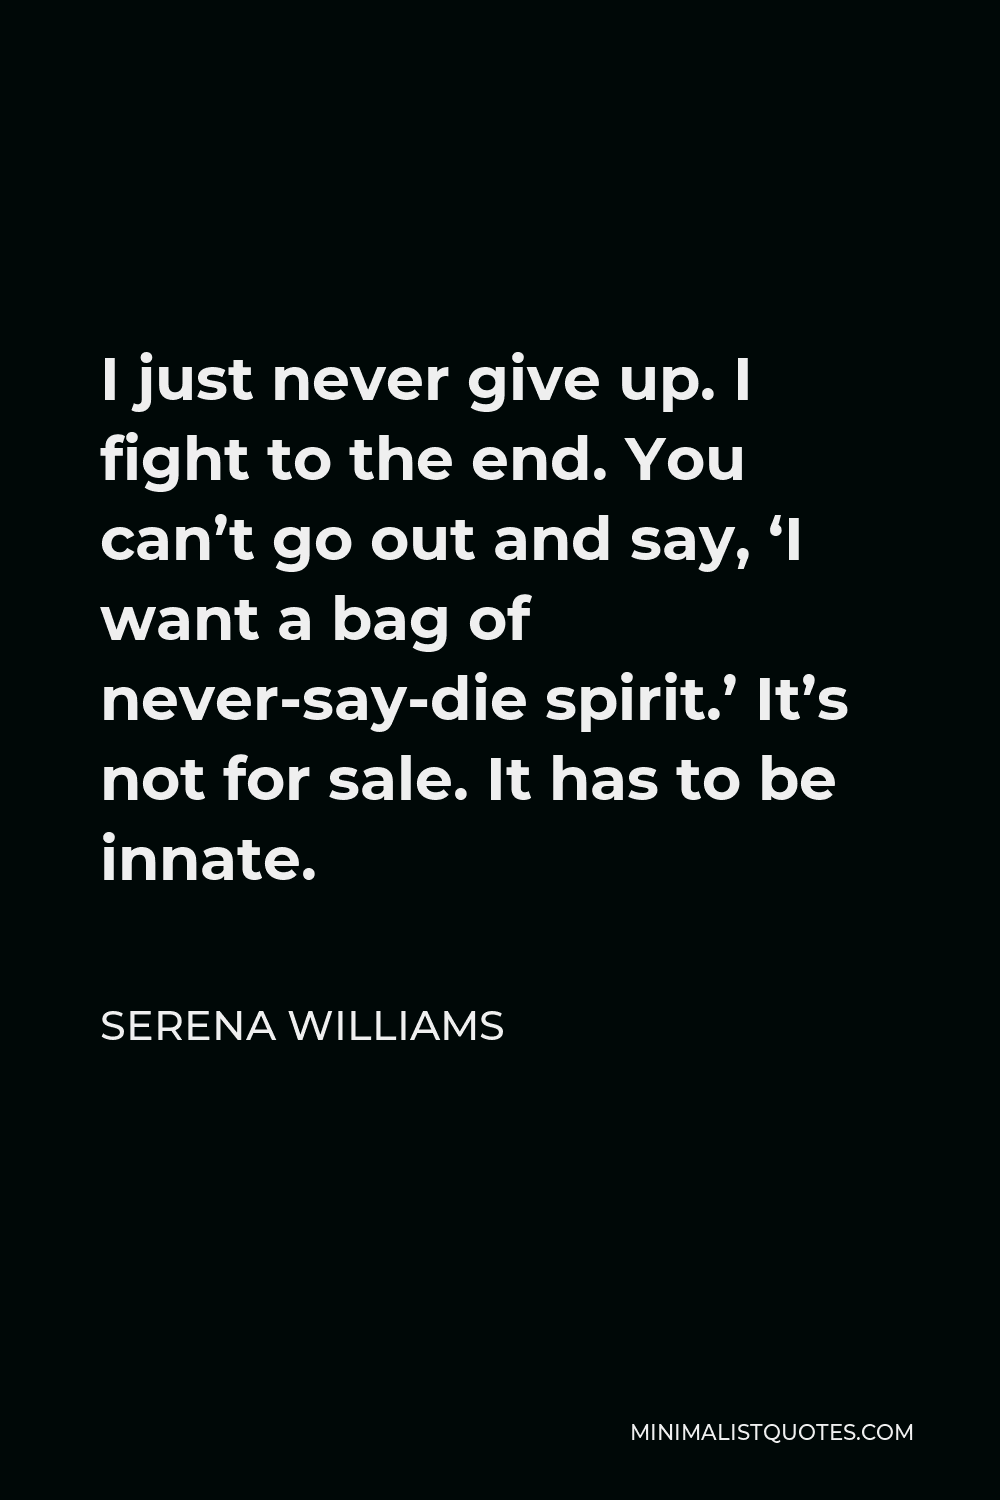 Serena Williams Quote - I just never give up. I fight to the end. You can’t go out and say, ‘I want a bag of never-say-die spirit.’ It’s not for sale. It has to be innate.